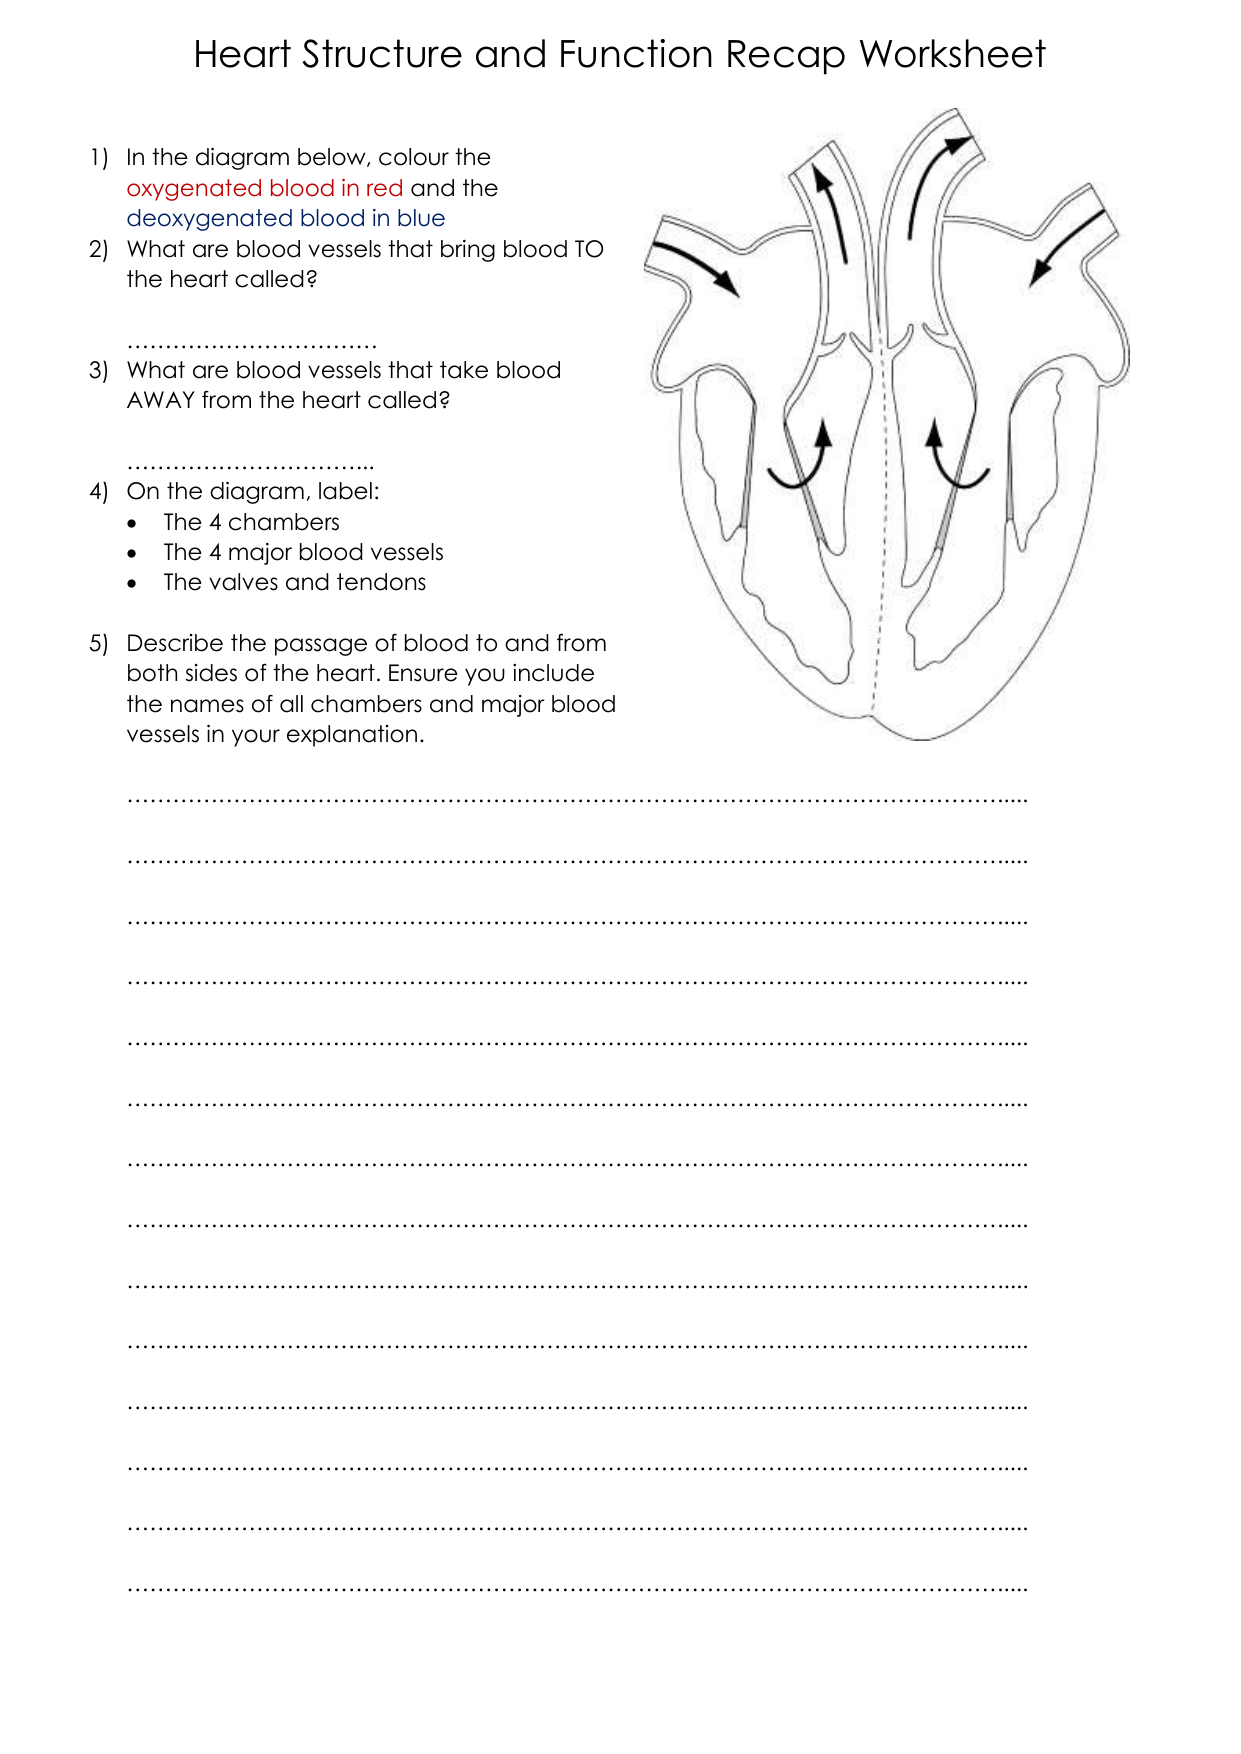 Heart-Structure-and-Function-Worksheet